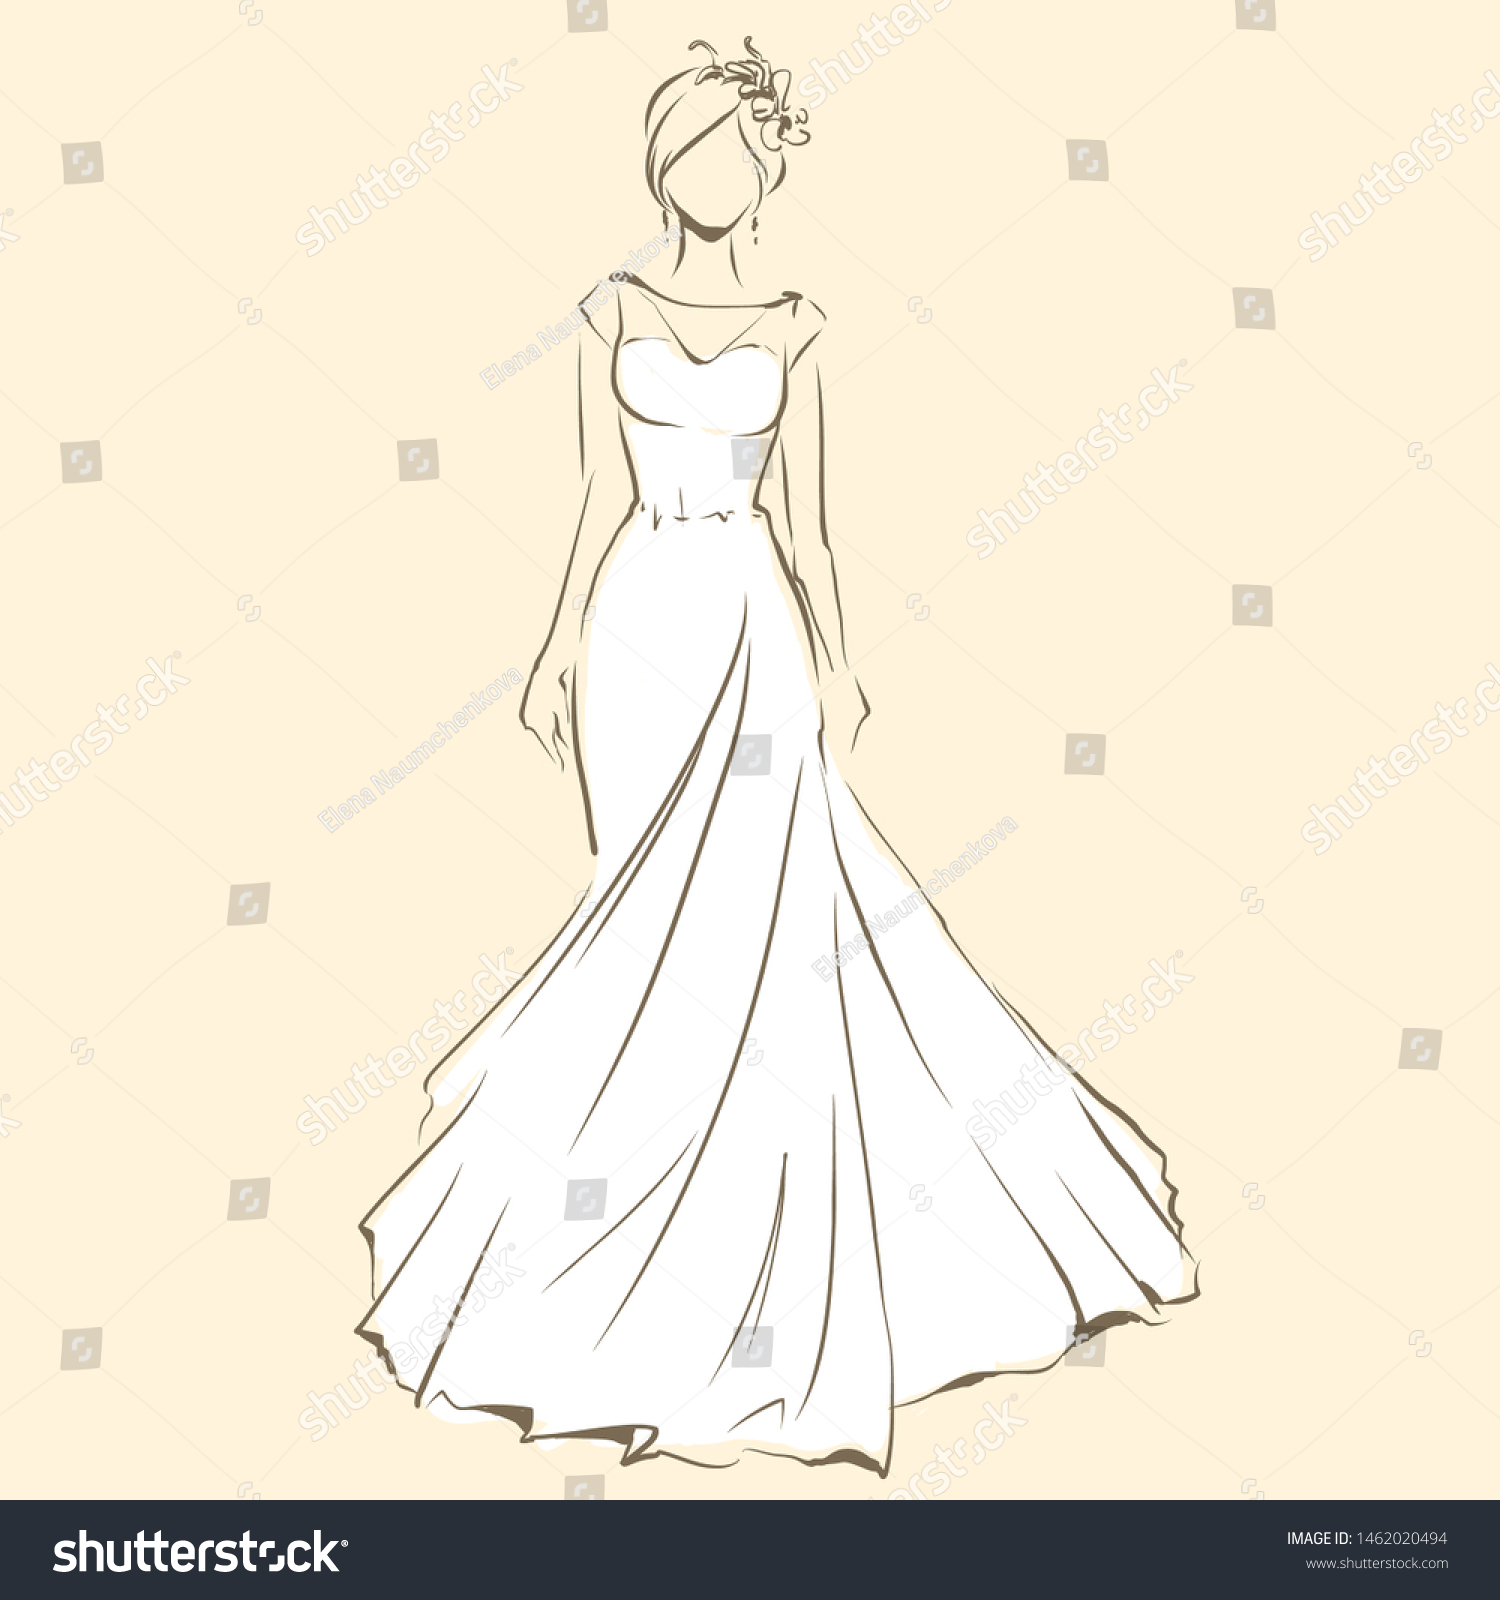 SVG of Elegant bride in beautiful dress. Standing and posing. Sketch slender silhouette of woman, line artwork for invitation or banner. Vector drawing, freehand svg